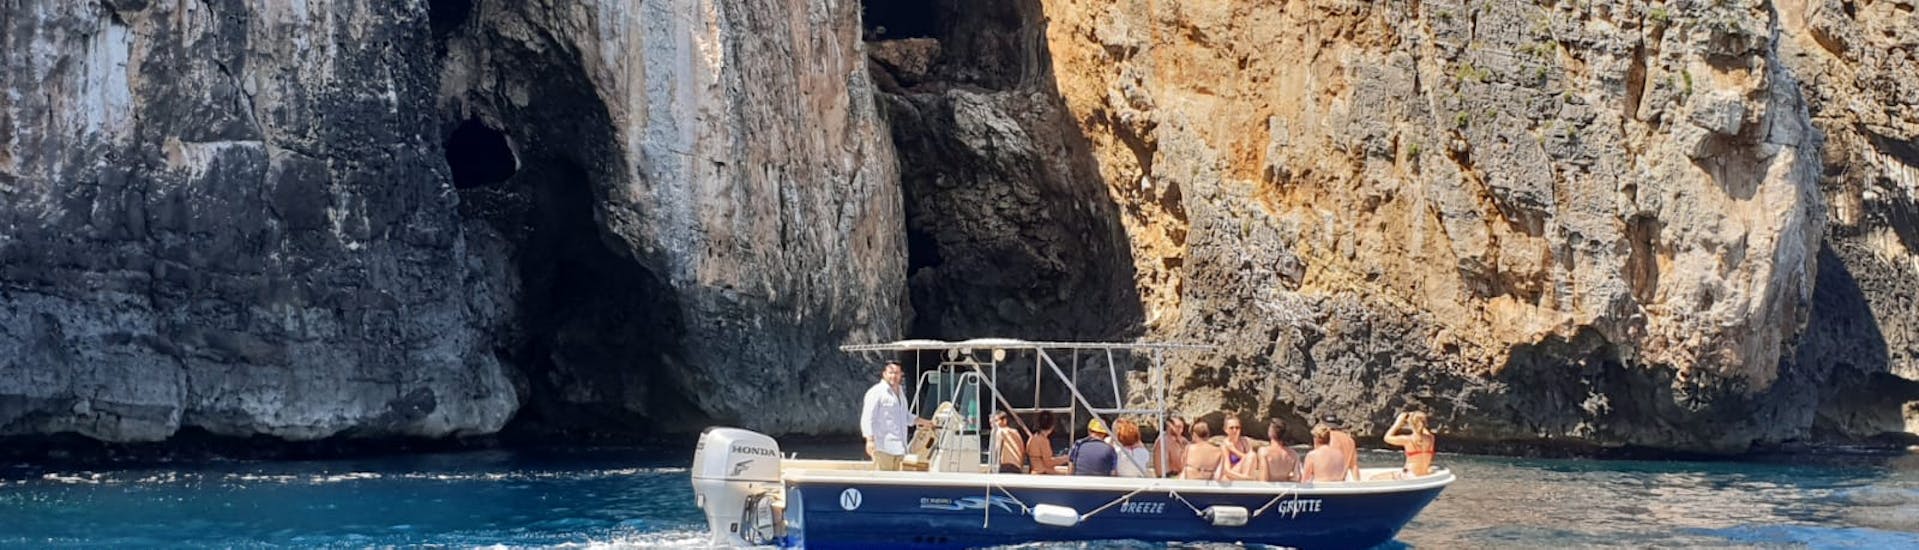 Our boat passing in front of the caves during the Boat Trip to the Caves of Santa Maria di Leuca with Lunch.